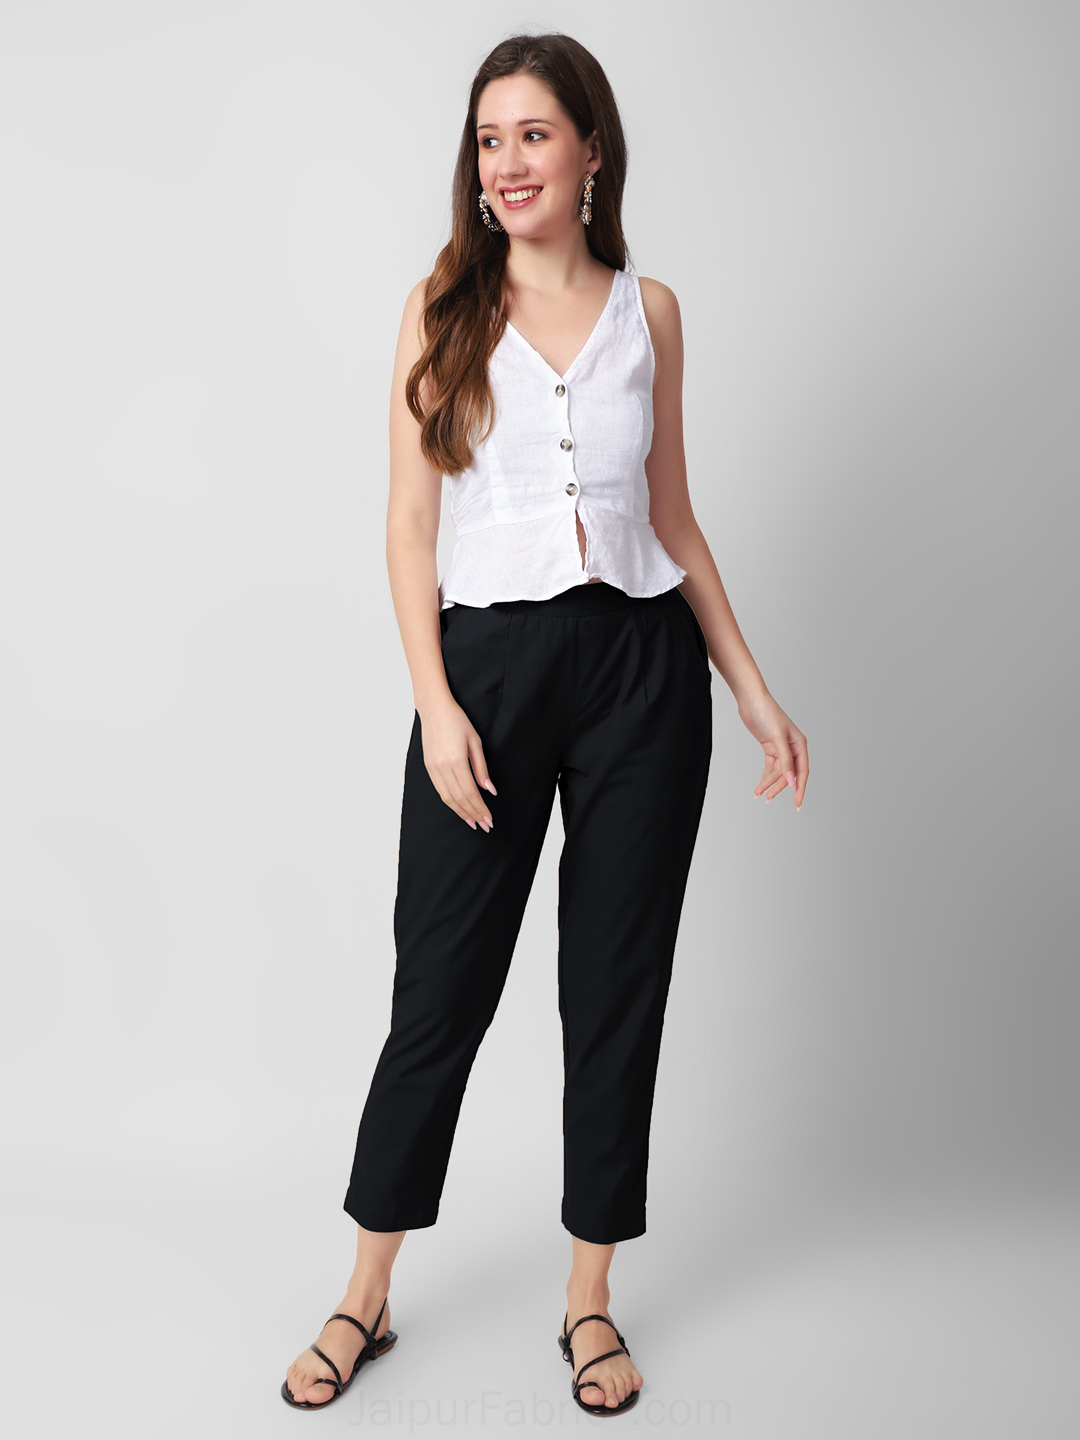 Shop Black Solid Regular Fit Cotton Trousers For Women | सादा /SAADAA